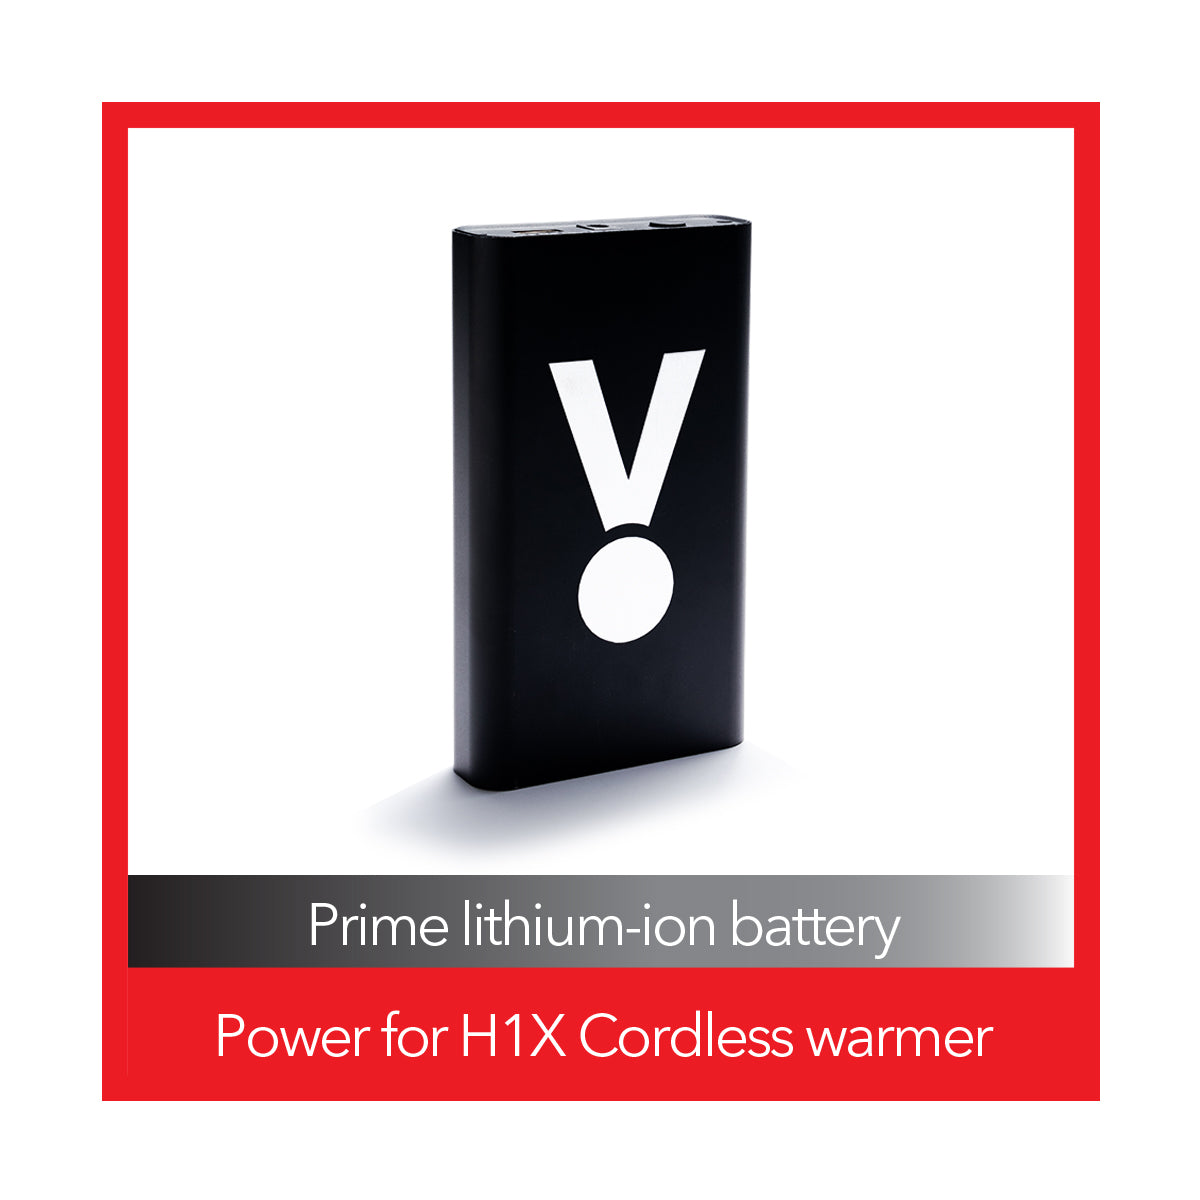 The H1X Powerbank is designed to power the H1X Cordless warmer.